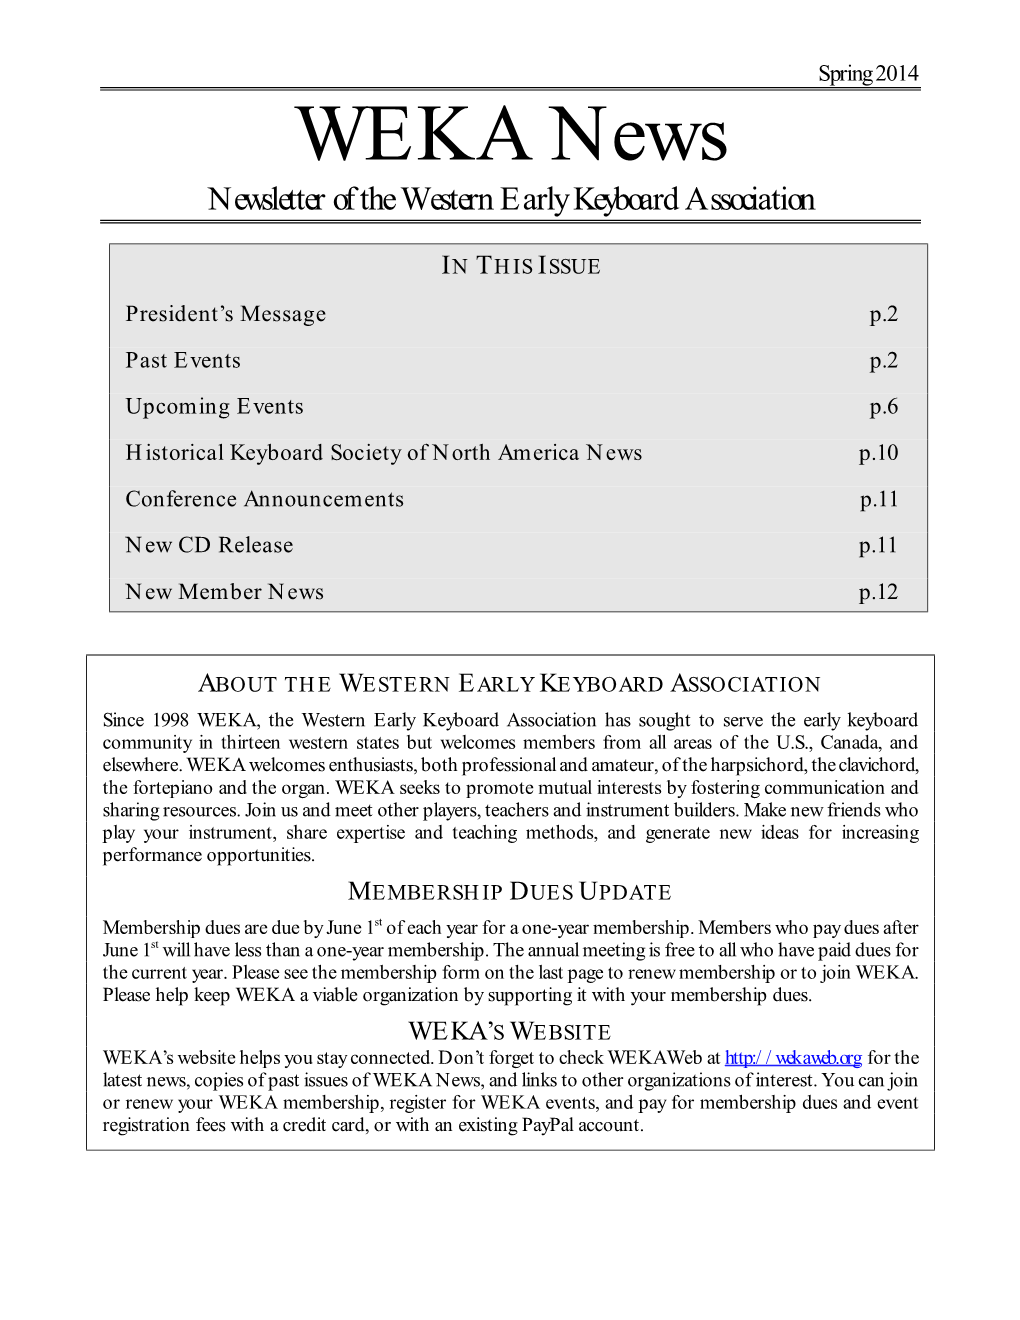 Spring 2014 WEKA News Newsletter of the Western Early Keyboard Association